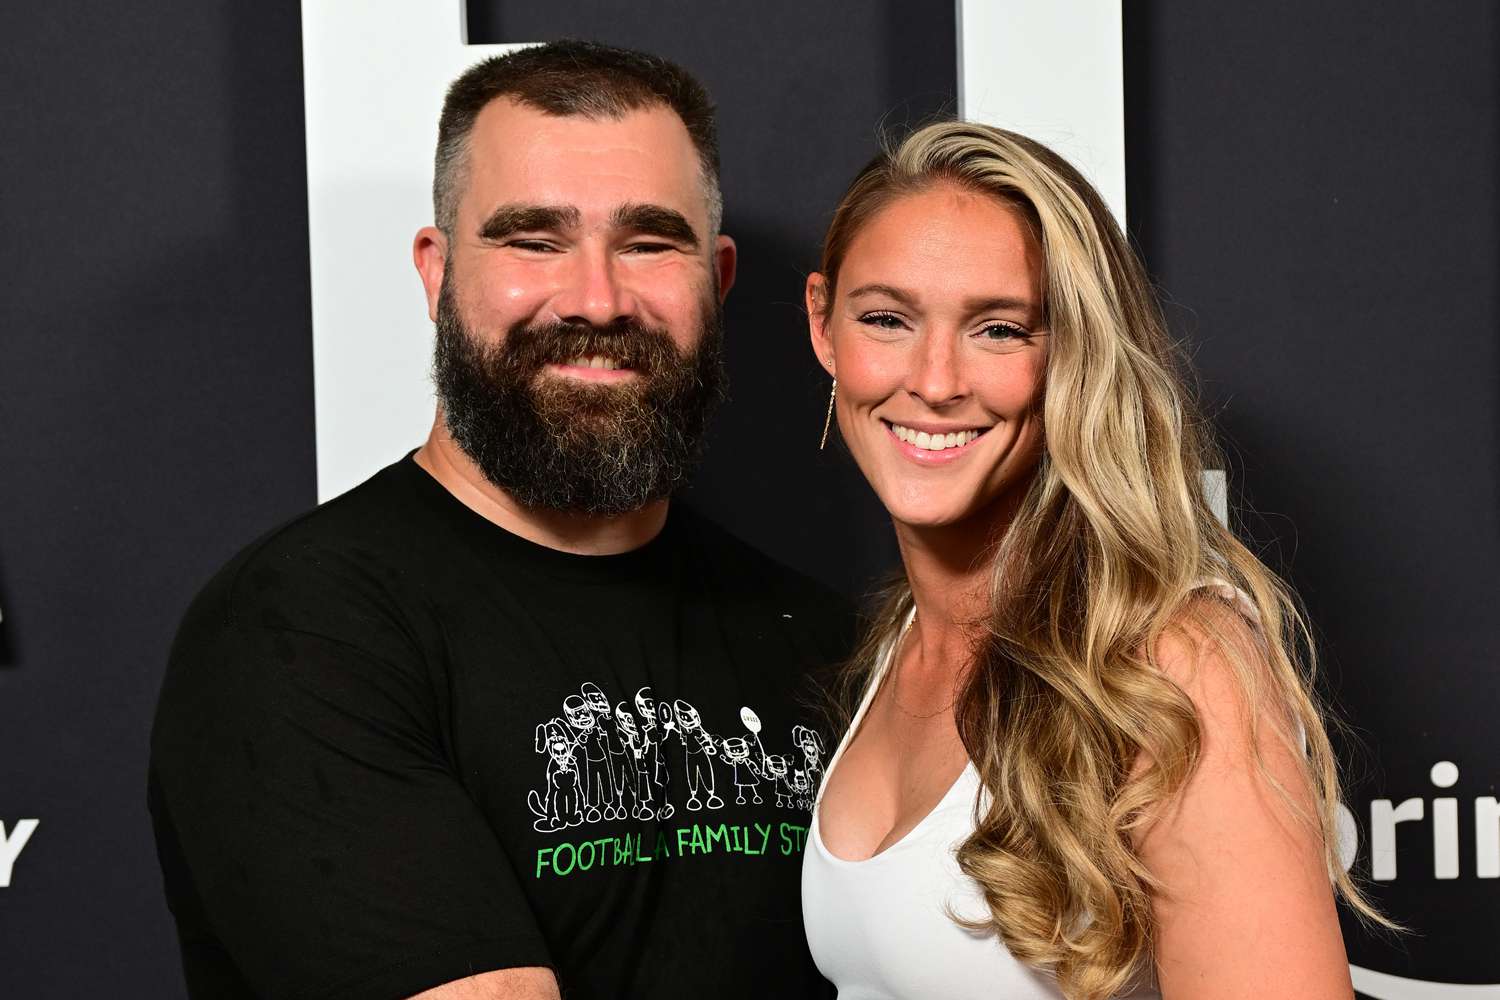 Woman Who Harassed Kylie and Jason Kelce for Photo Apologizes: ‘Not Who I Am’